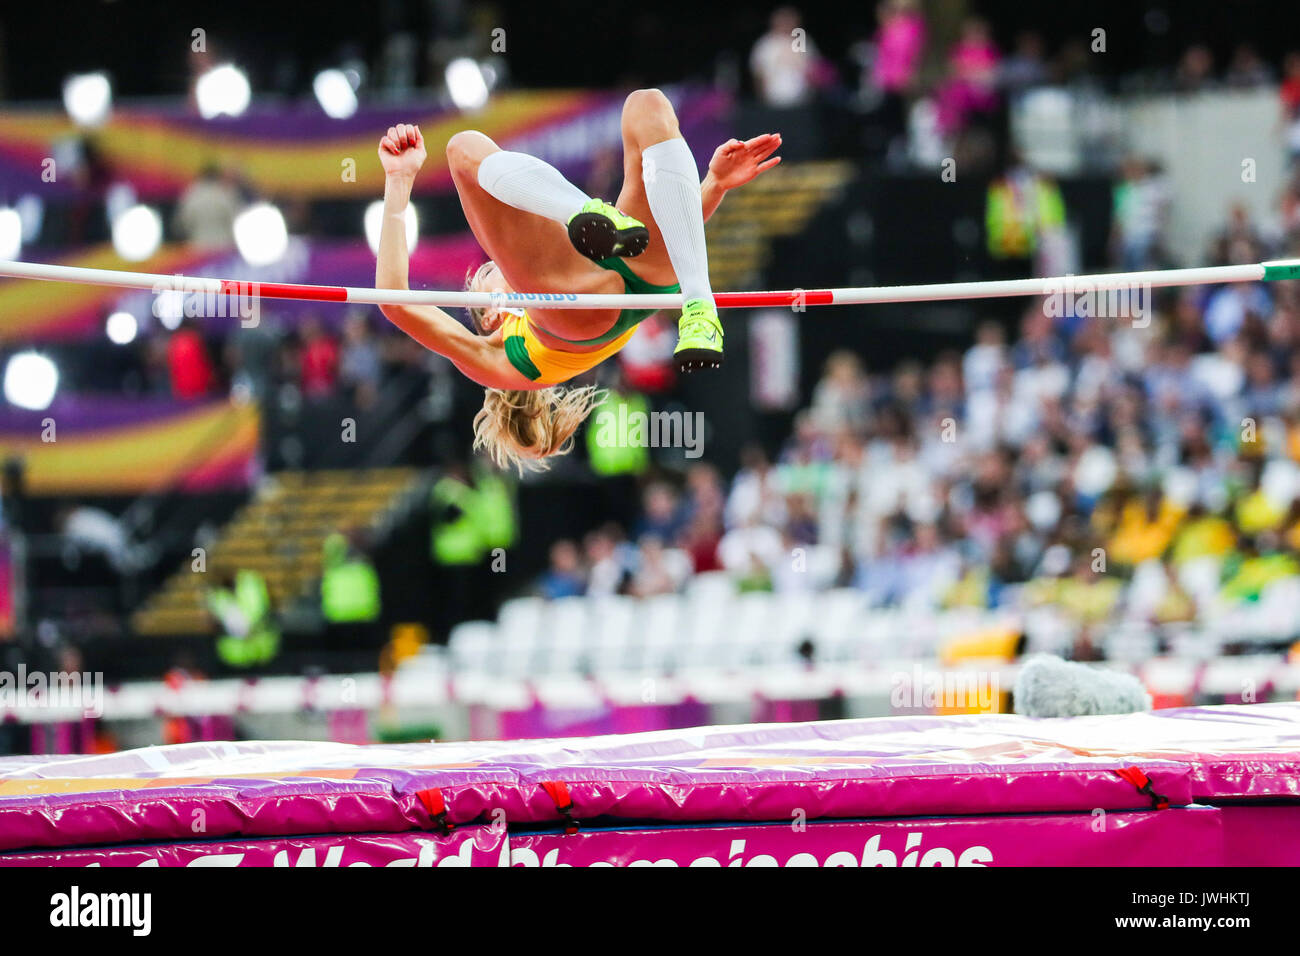 London, UK. 12th Aug, 2017.  Airiné Palšyté, Lithuania, in the women's high jump final on day nine of the IAAF London 2017 world Championships at the London Stadium. Credit: Paul Davey/Alamy Live News Stock Photo